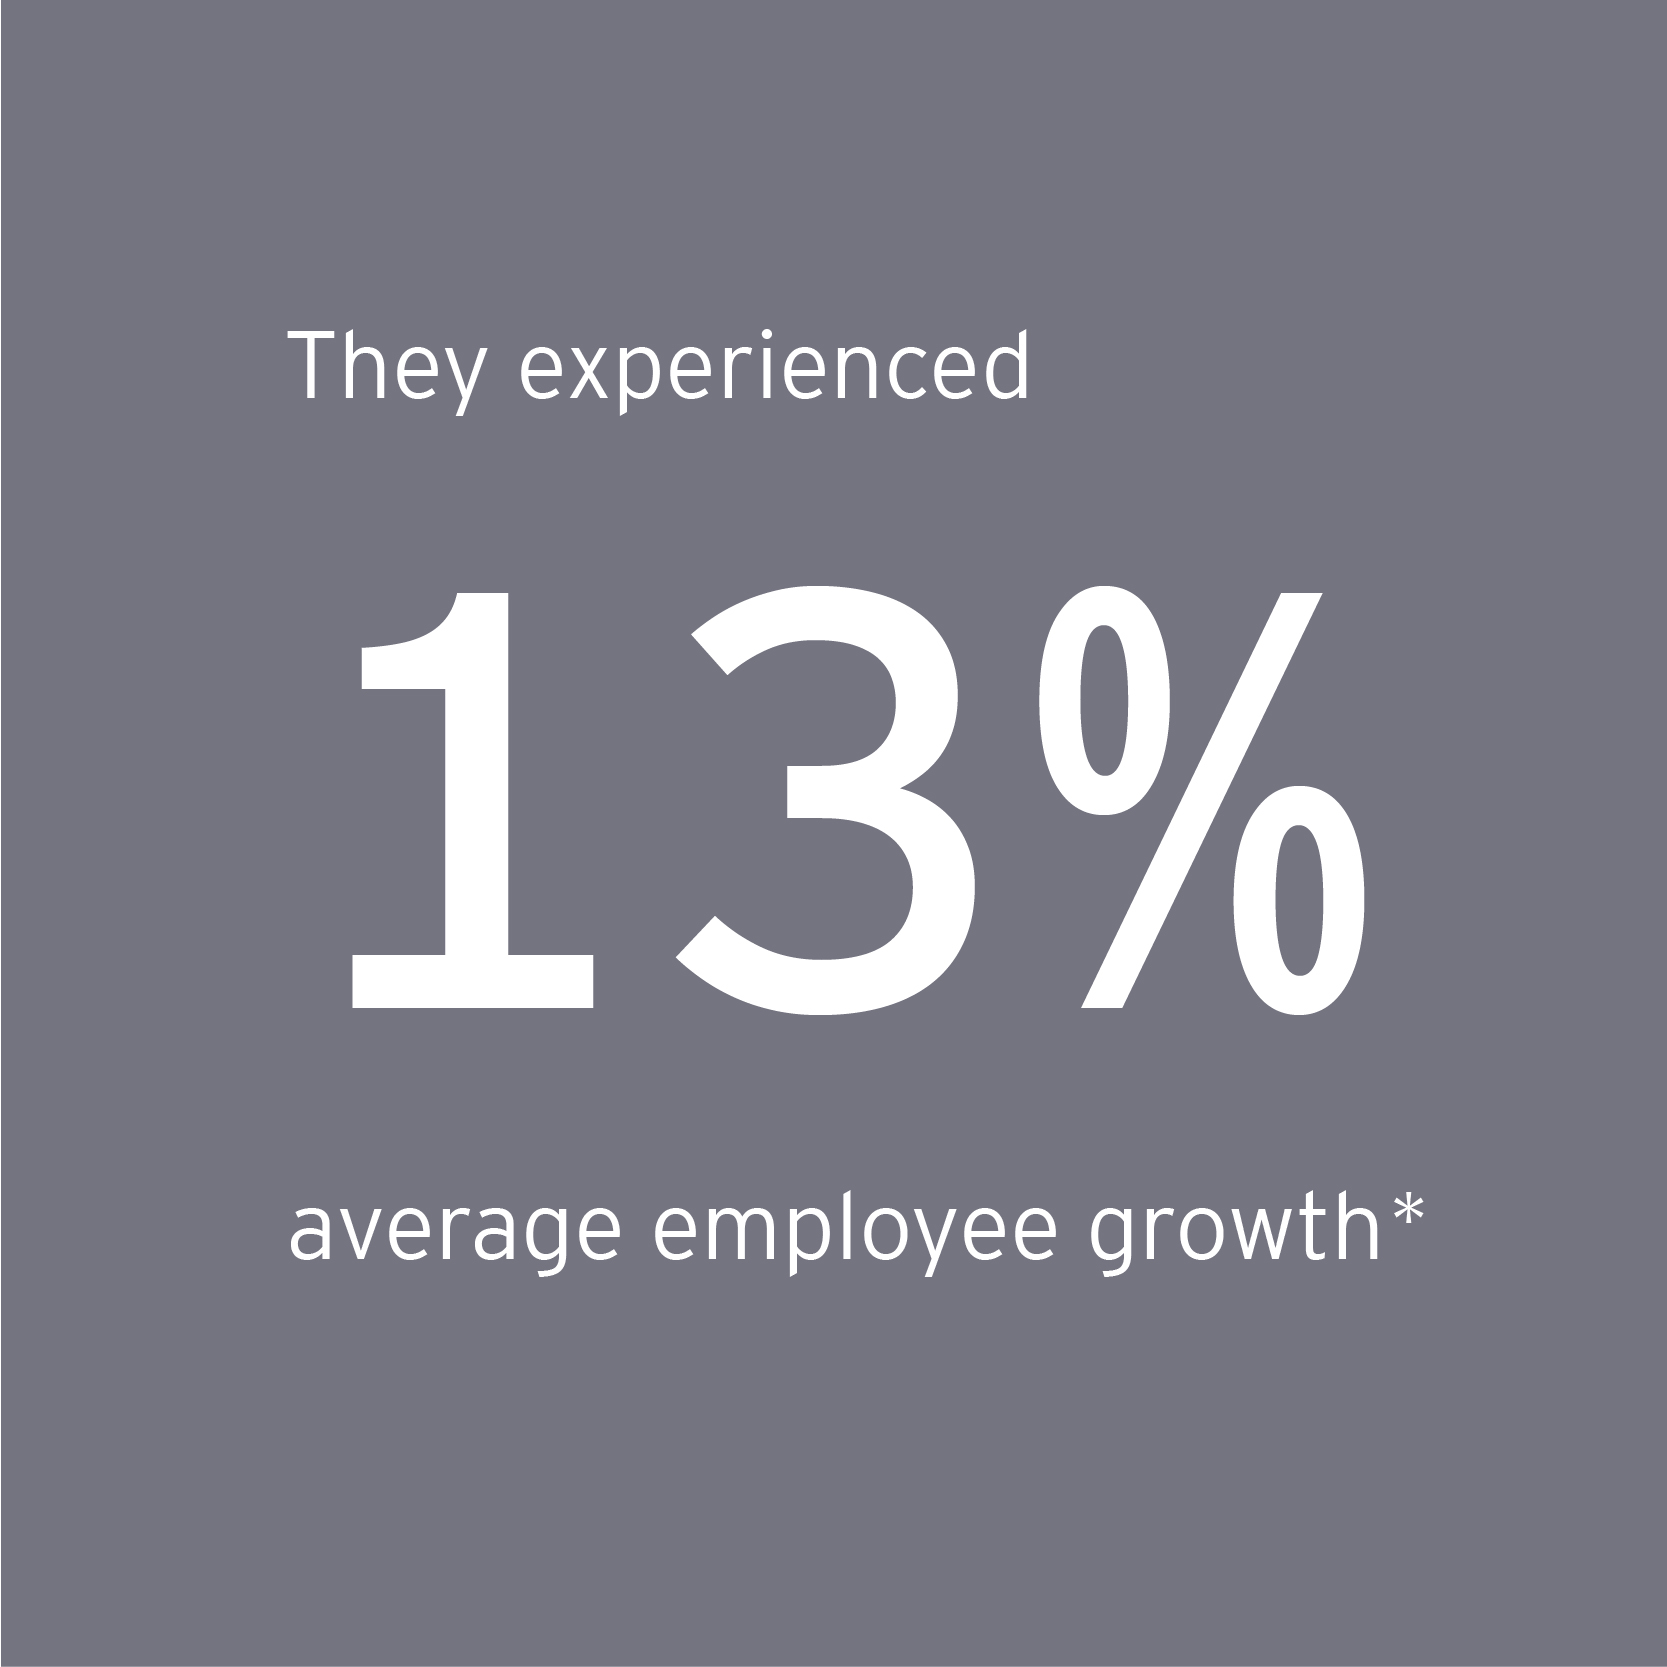 EOY Pacific Southwest finalists experienced 13% average employee growth